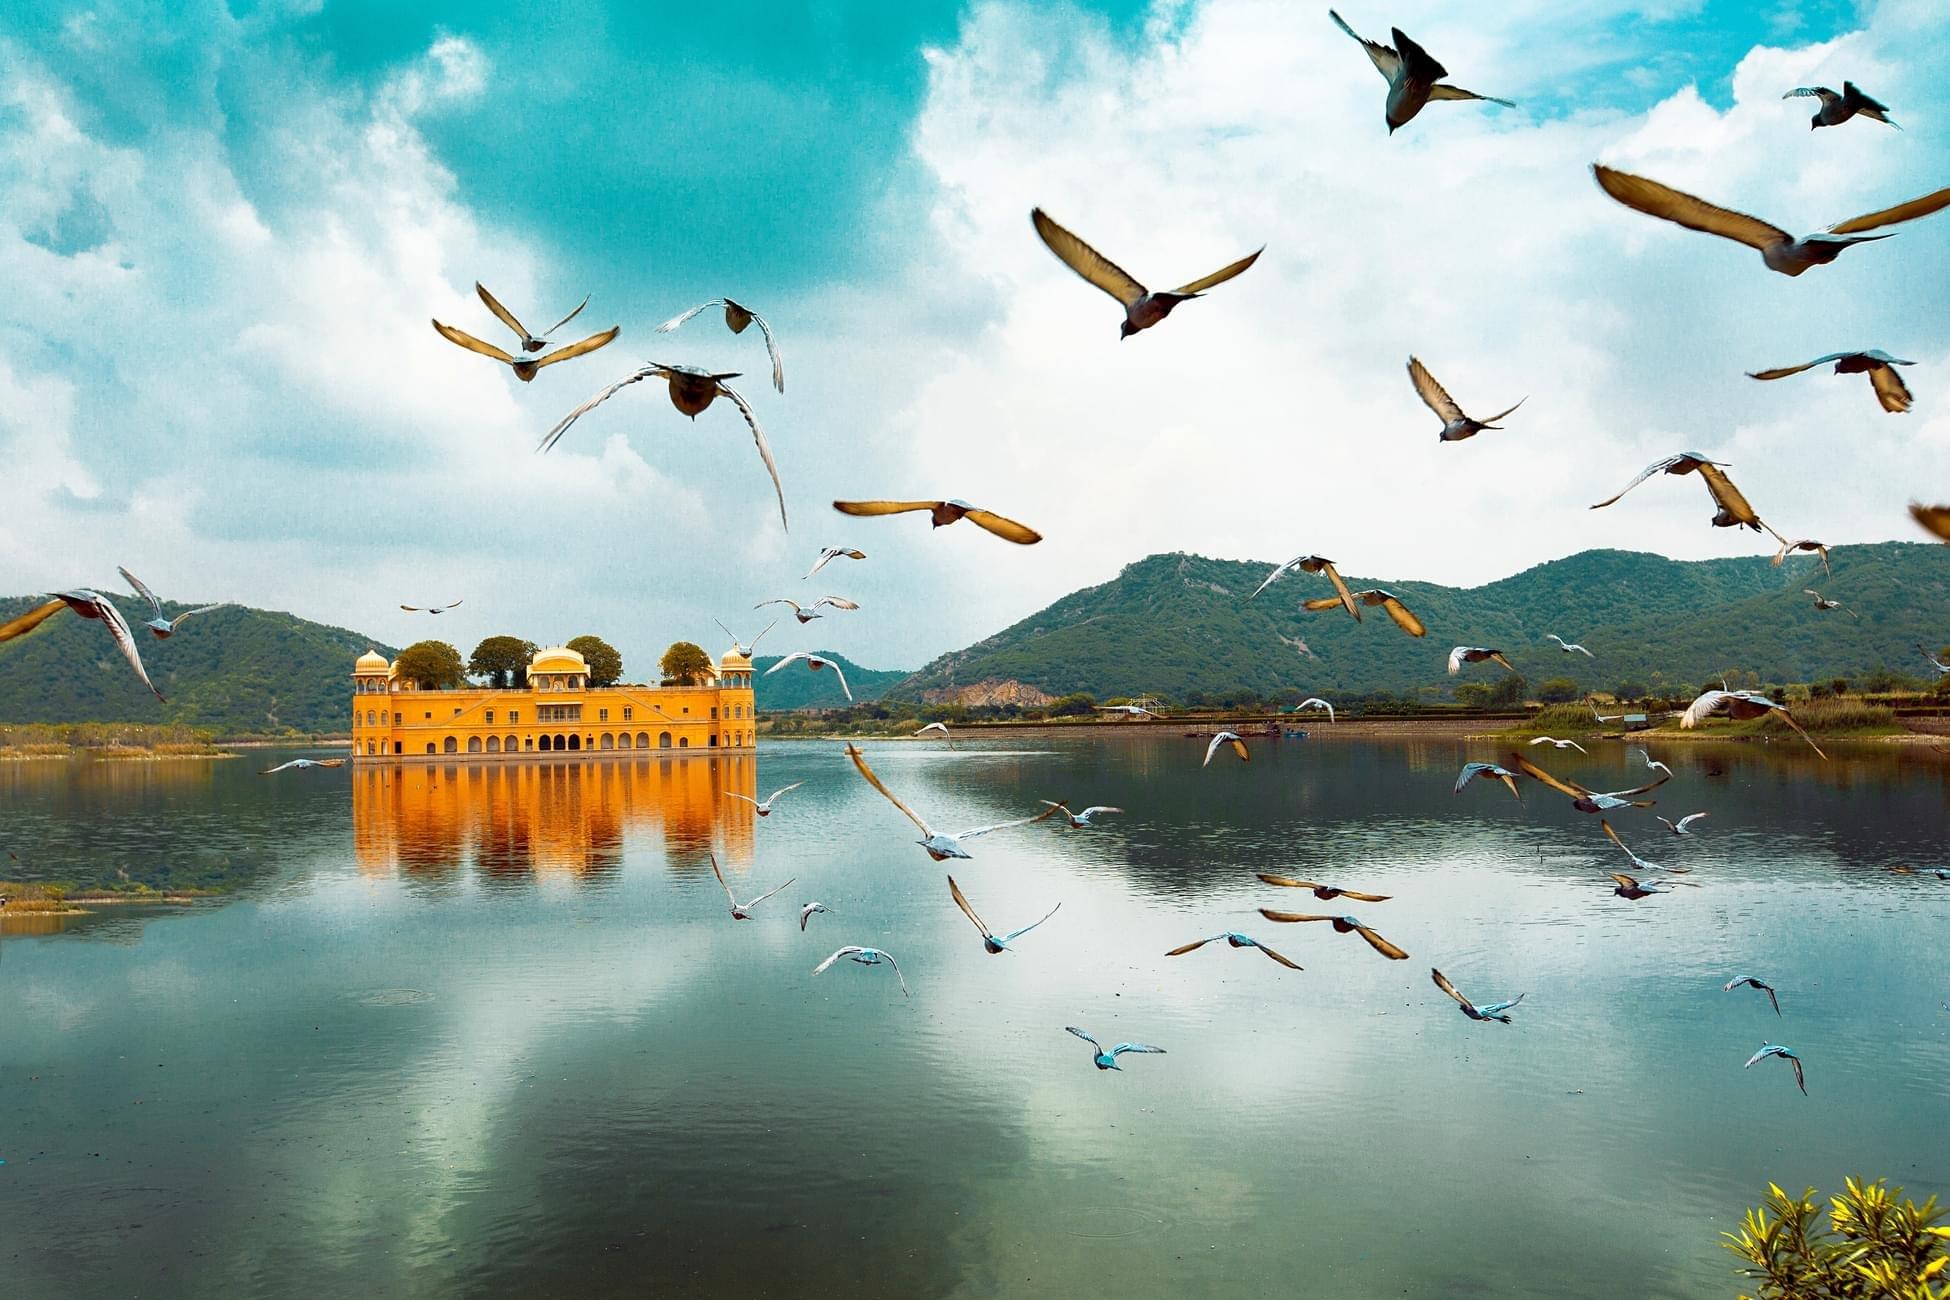 Jaipur Packages from Bangalore | Get Upto 50% Off